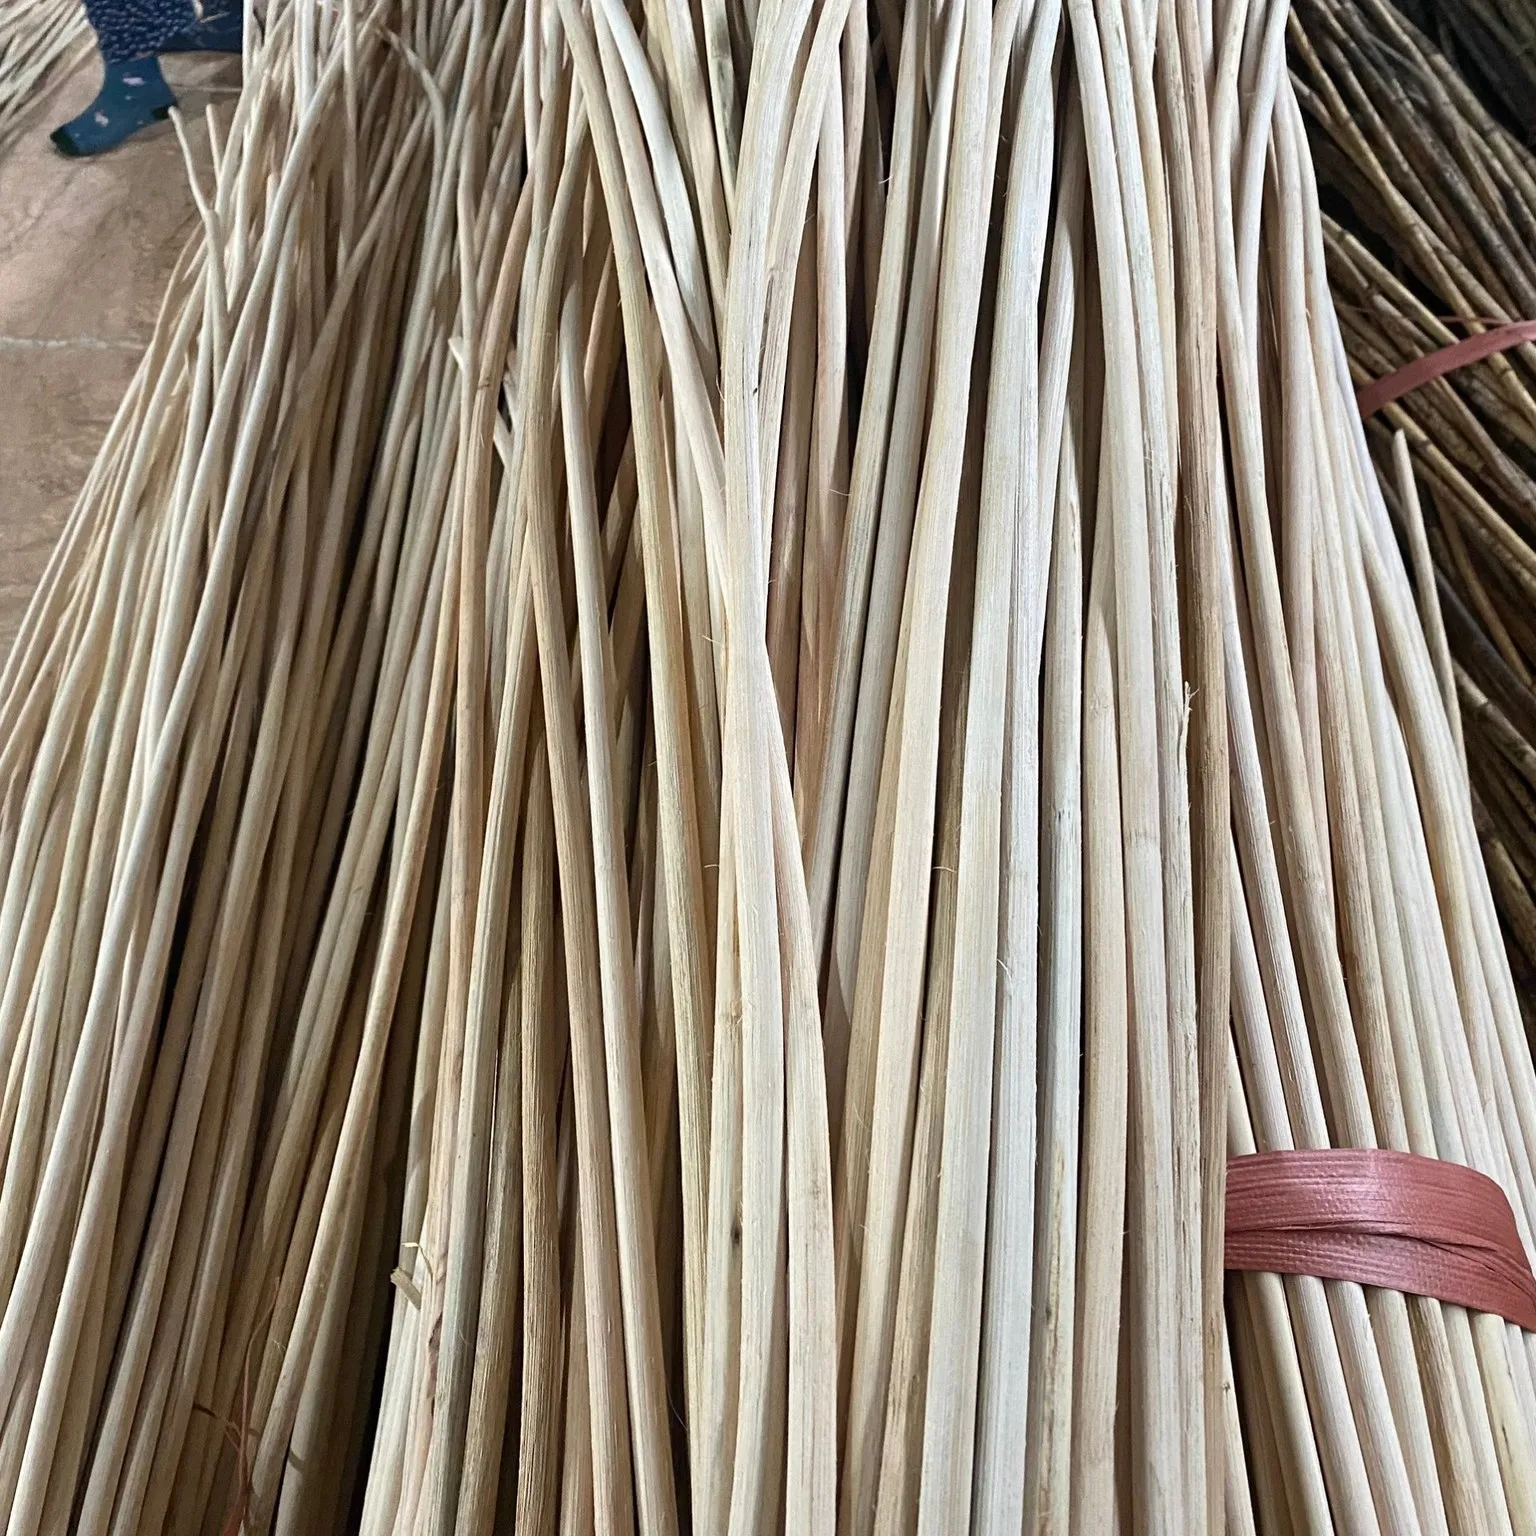 2023 New Product Rattan Canes/ Rattan Poles For Home Furniture ///Teresa +84971482716